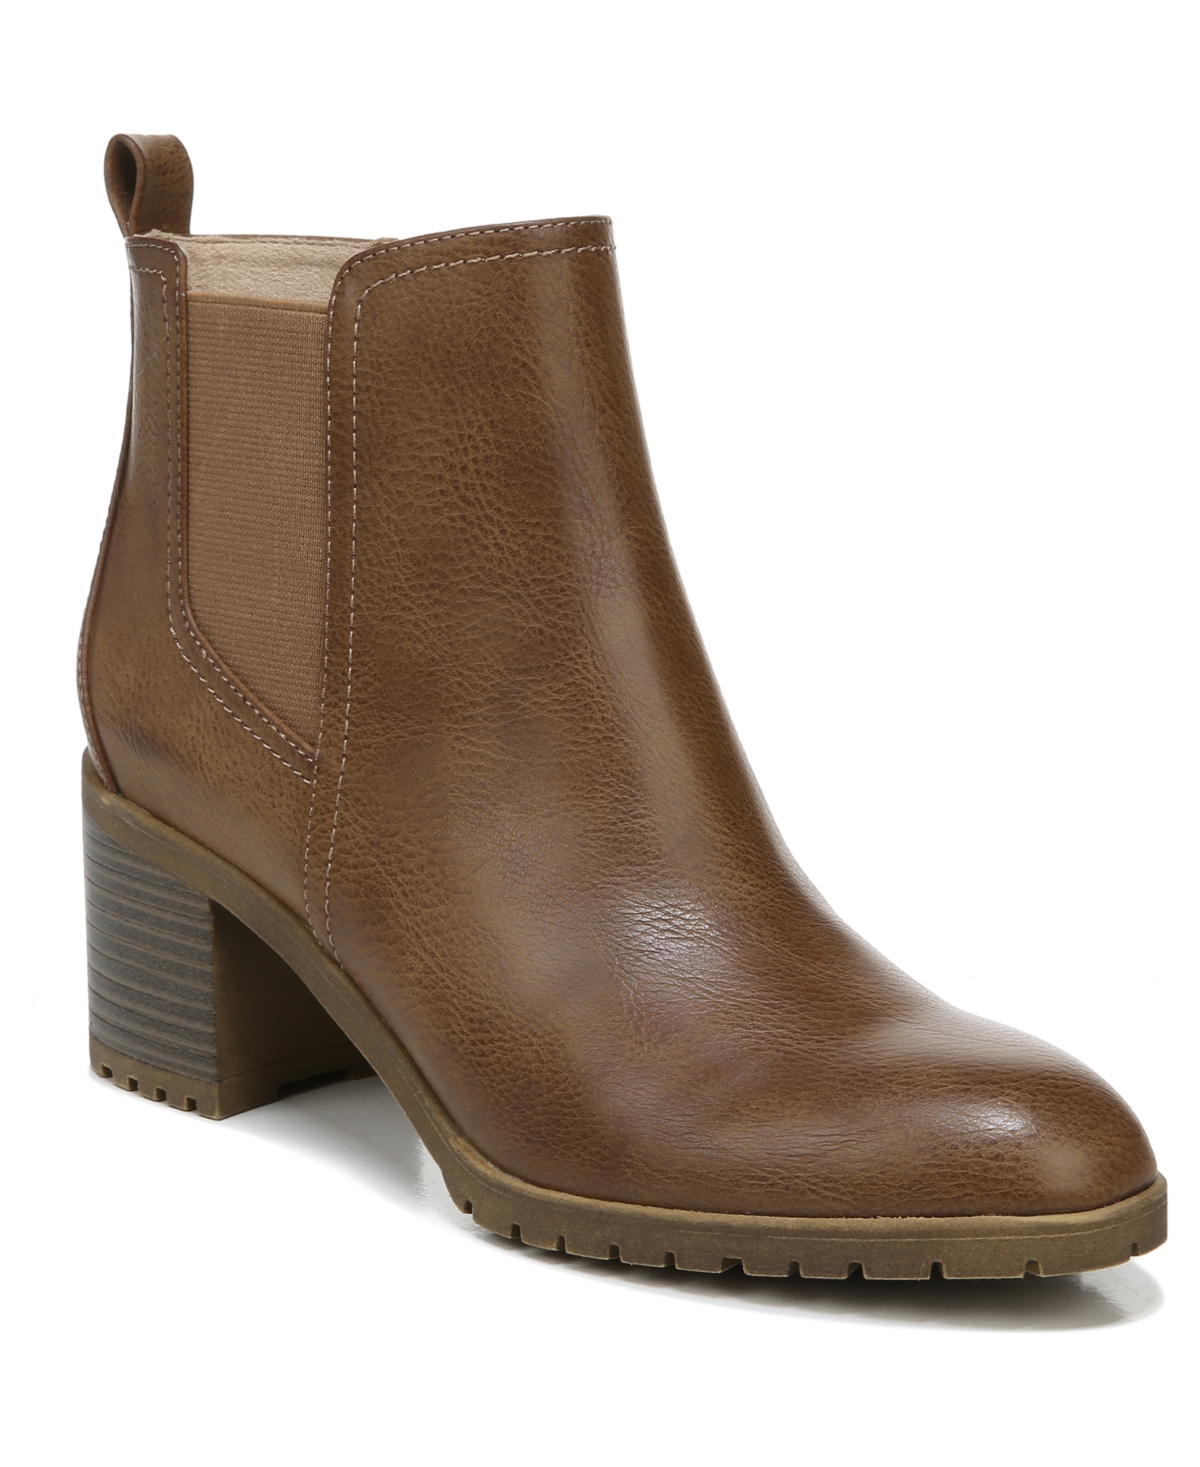 Lifestride Mesa Booties In Whiskey Faux Leather